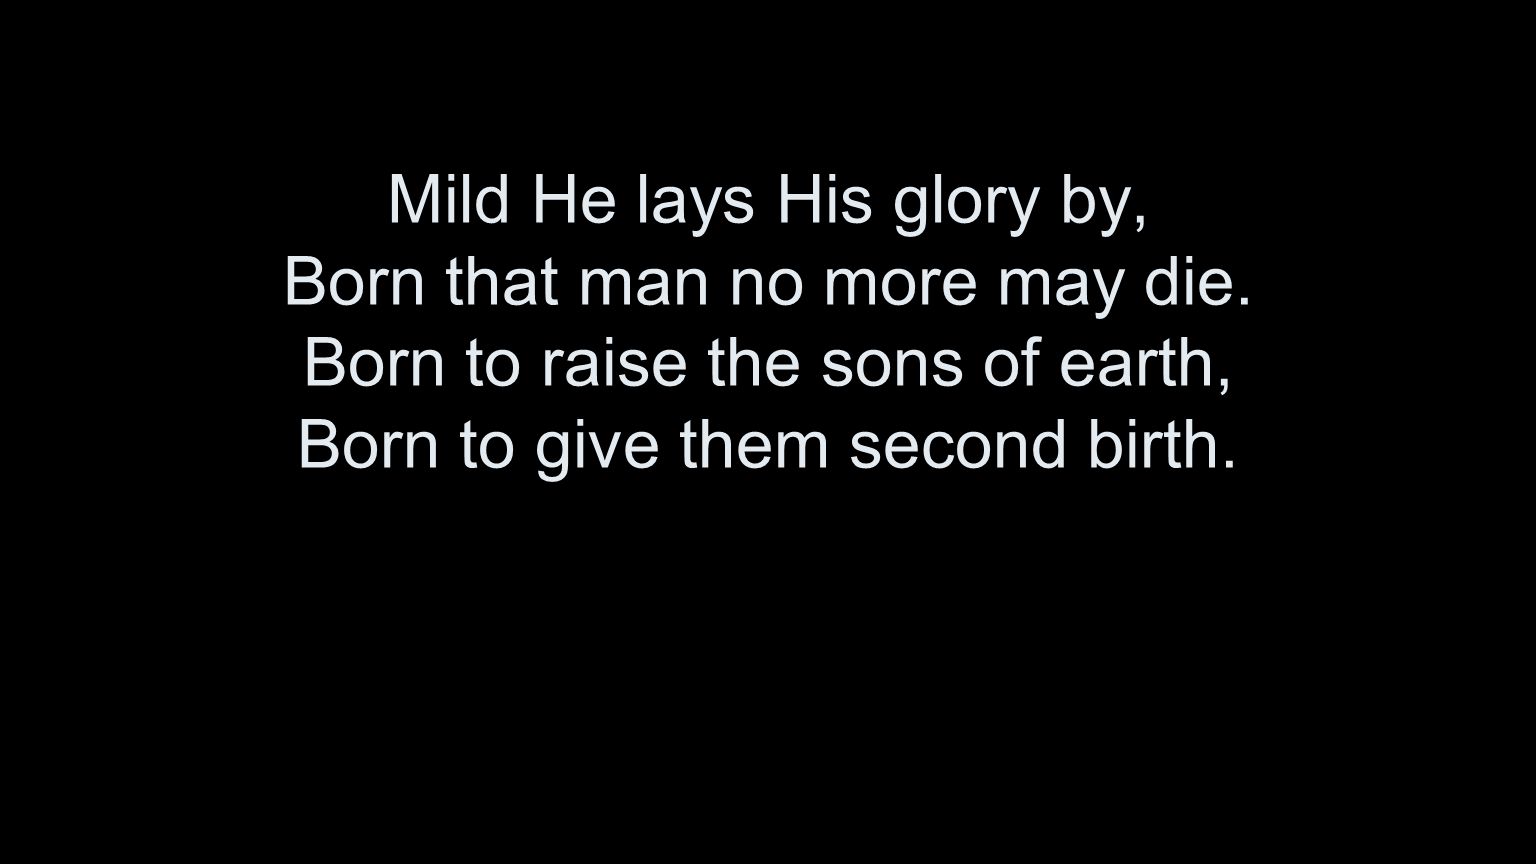 Mild He lays His glory by, Born that man no more may die.